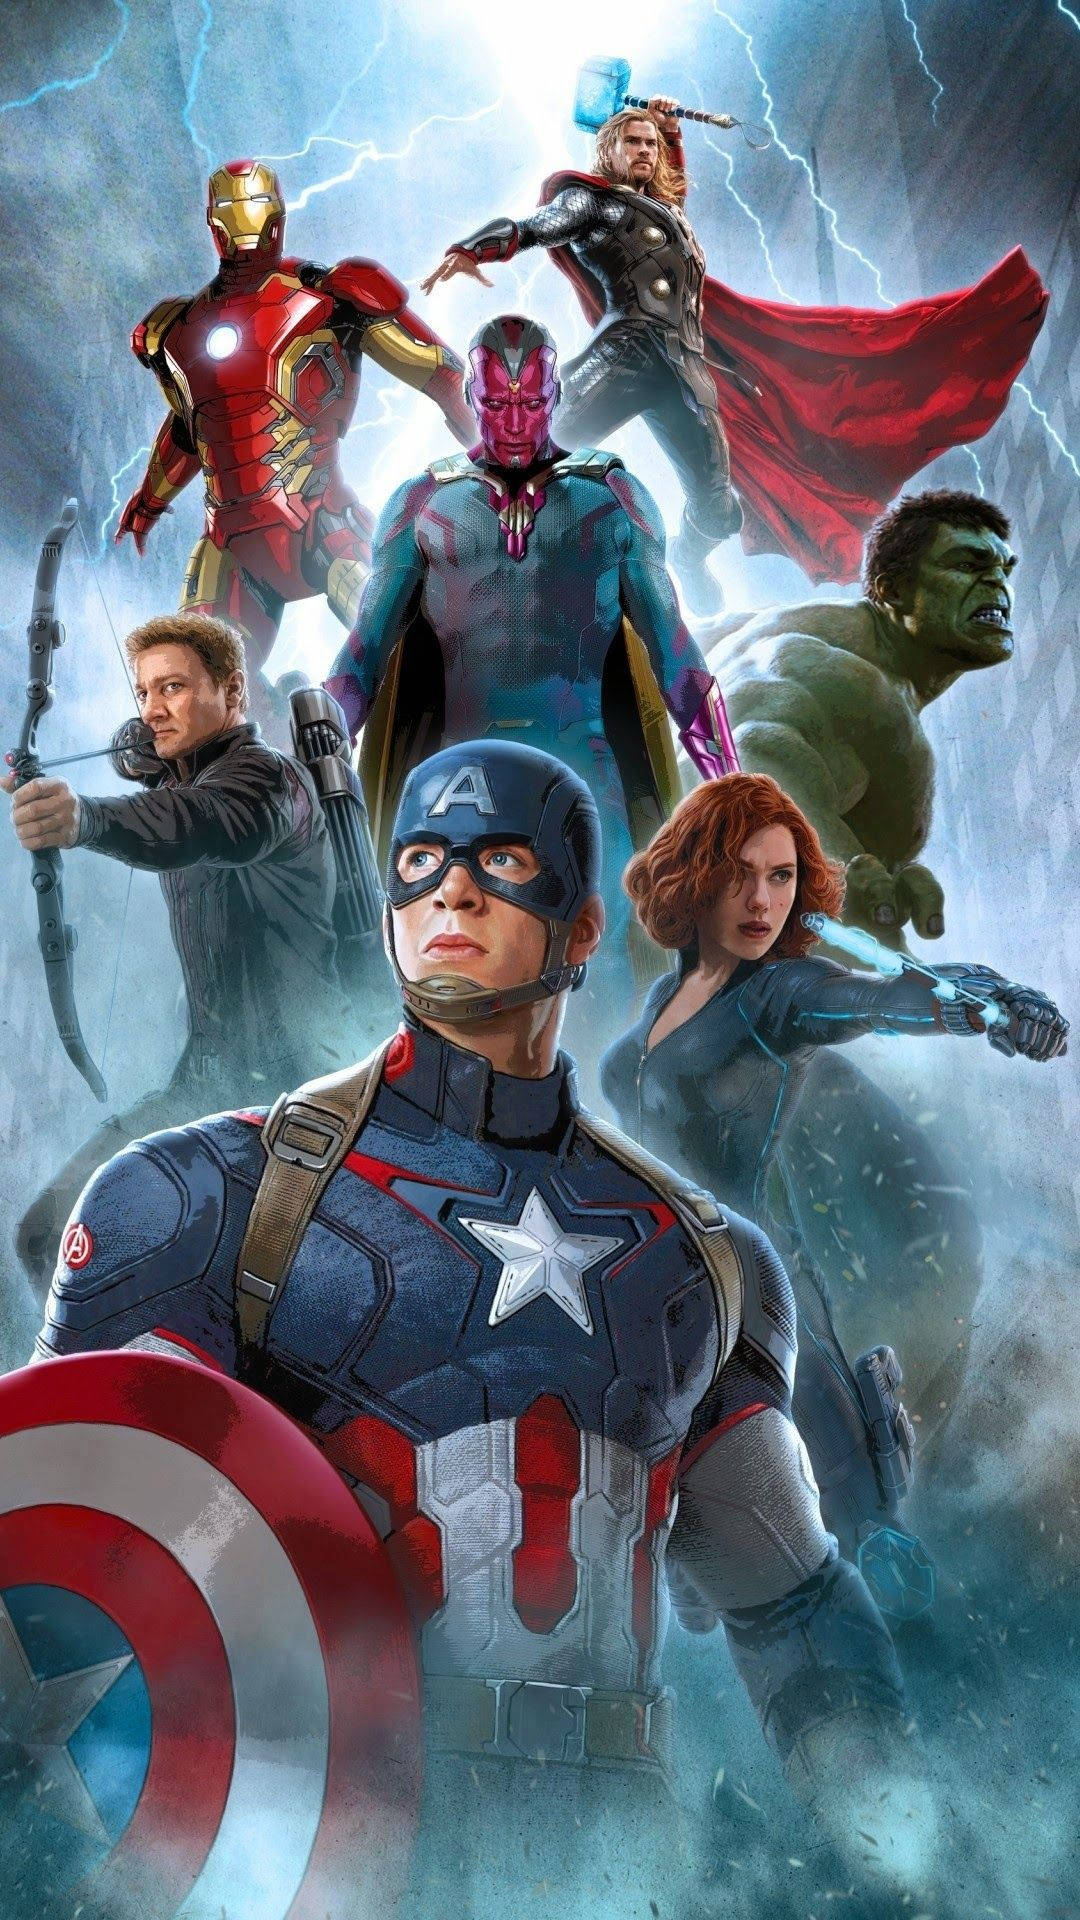 Avengers superheroes characters, Hulk, Captain America, Black widow, Iron man and others.